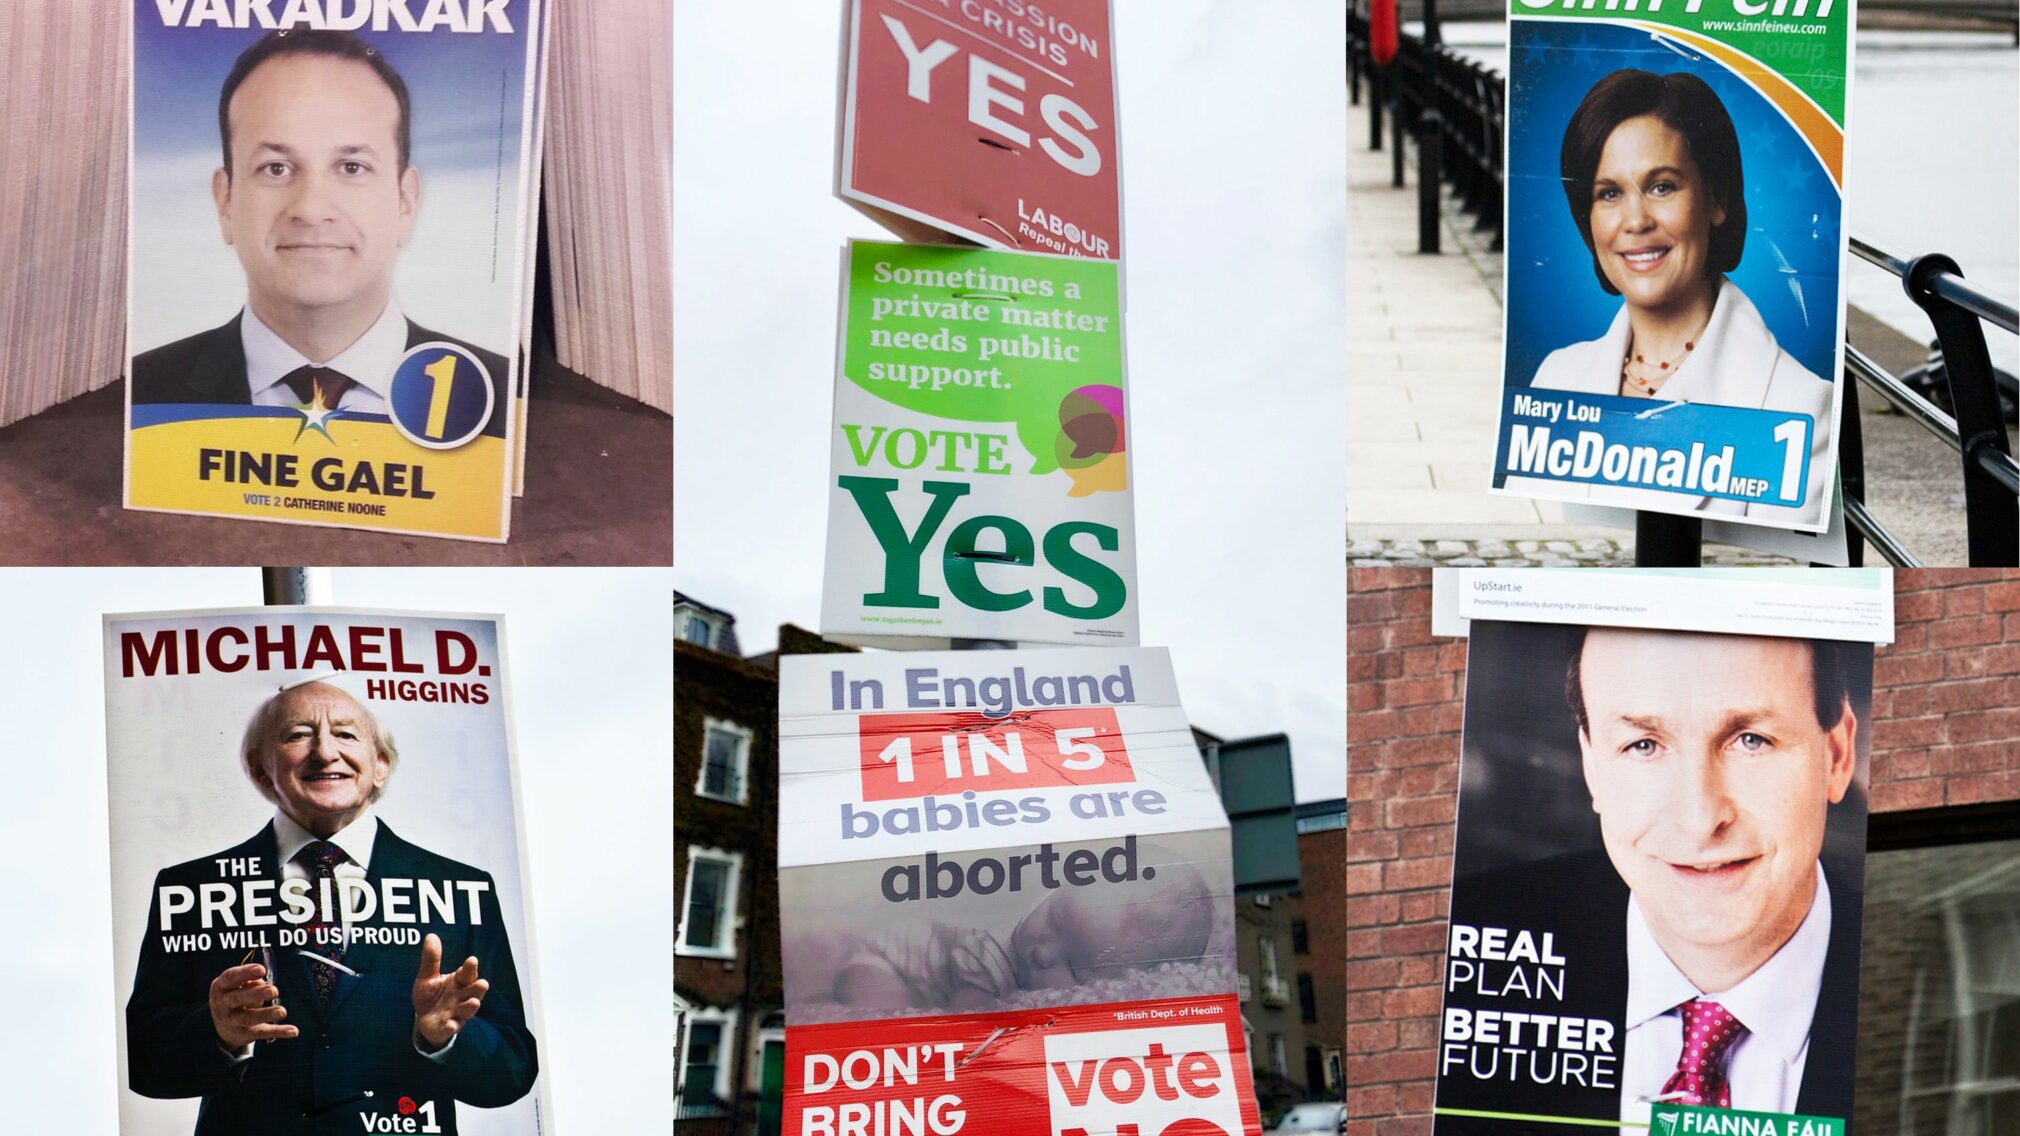 ElectionPosters. Photo Credits: Flickr: @infomatique (William Murphy) and @sonsespics, Twitter @fgdubw